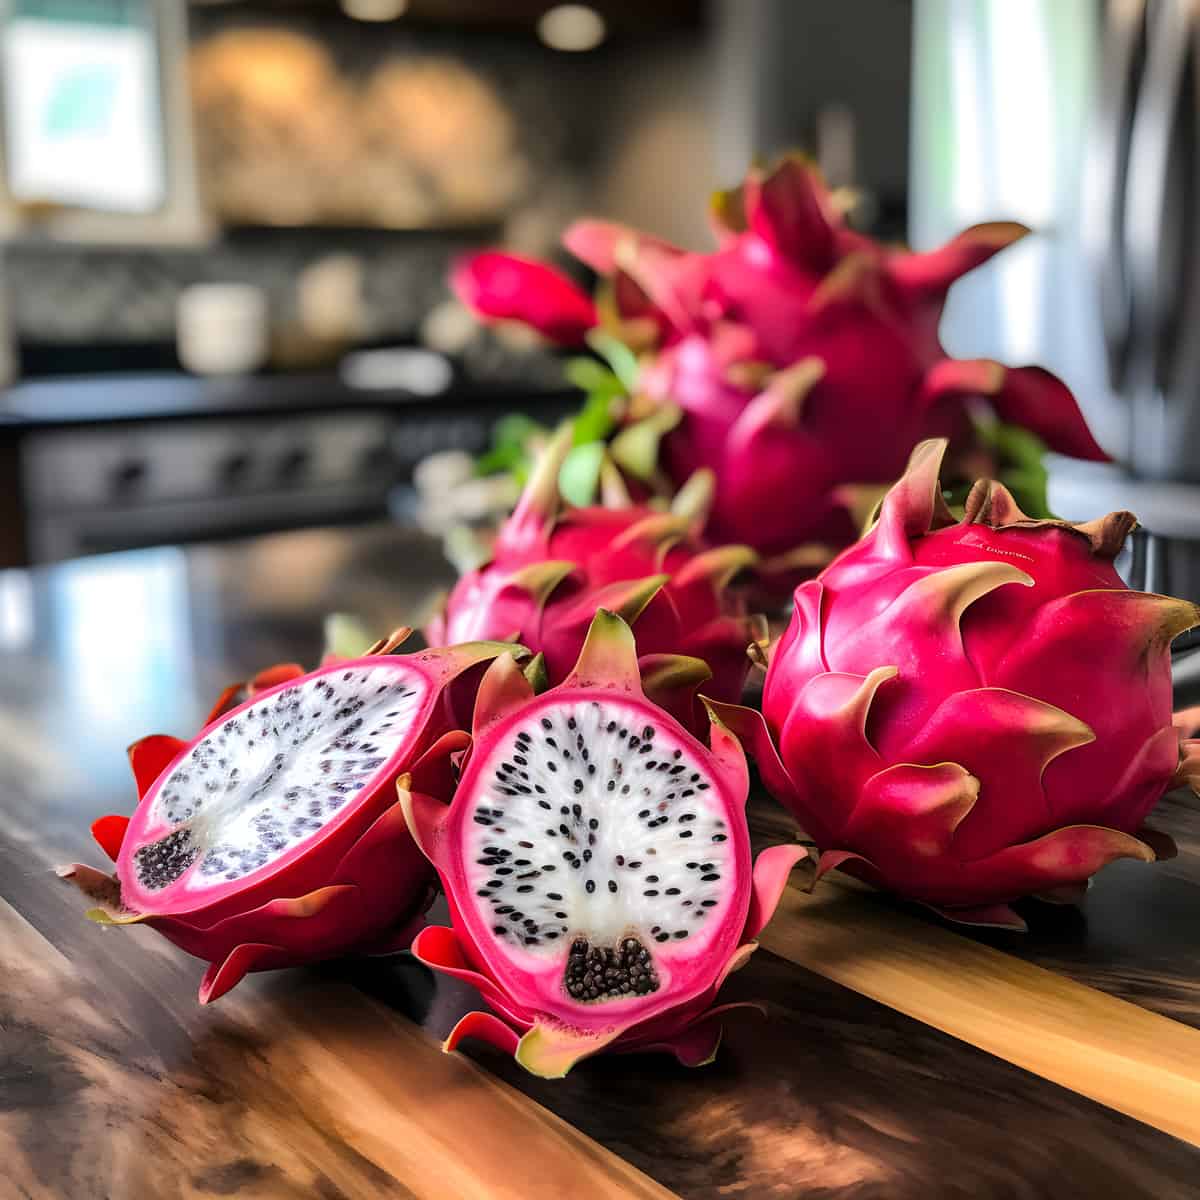 Dragon Fruit on a kitchen counter